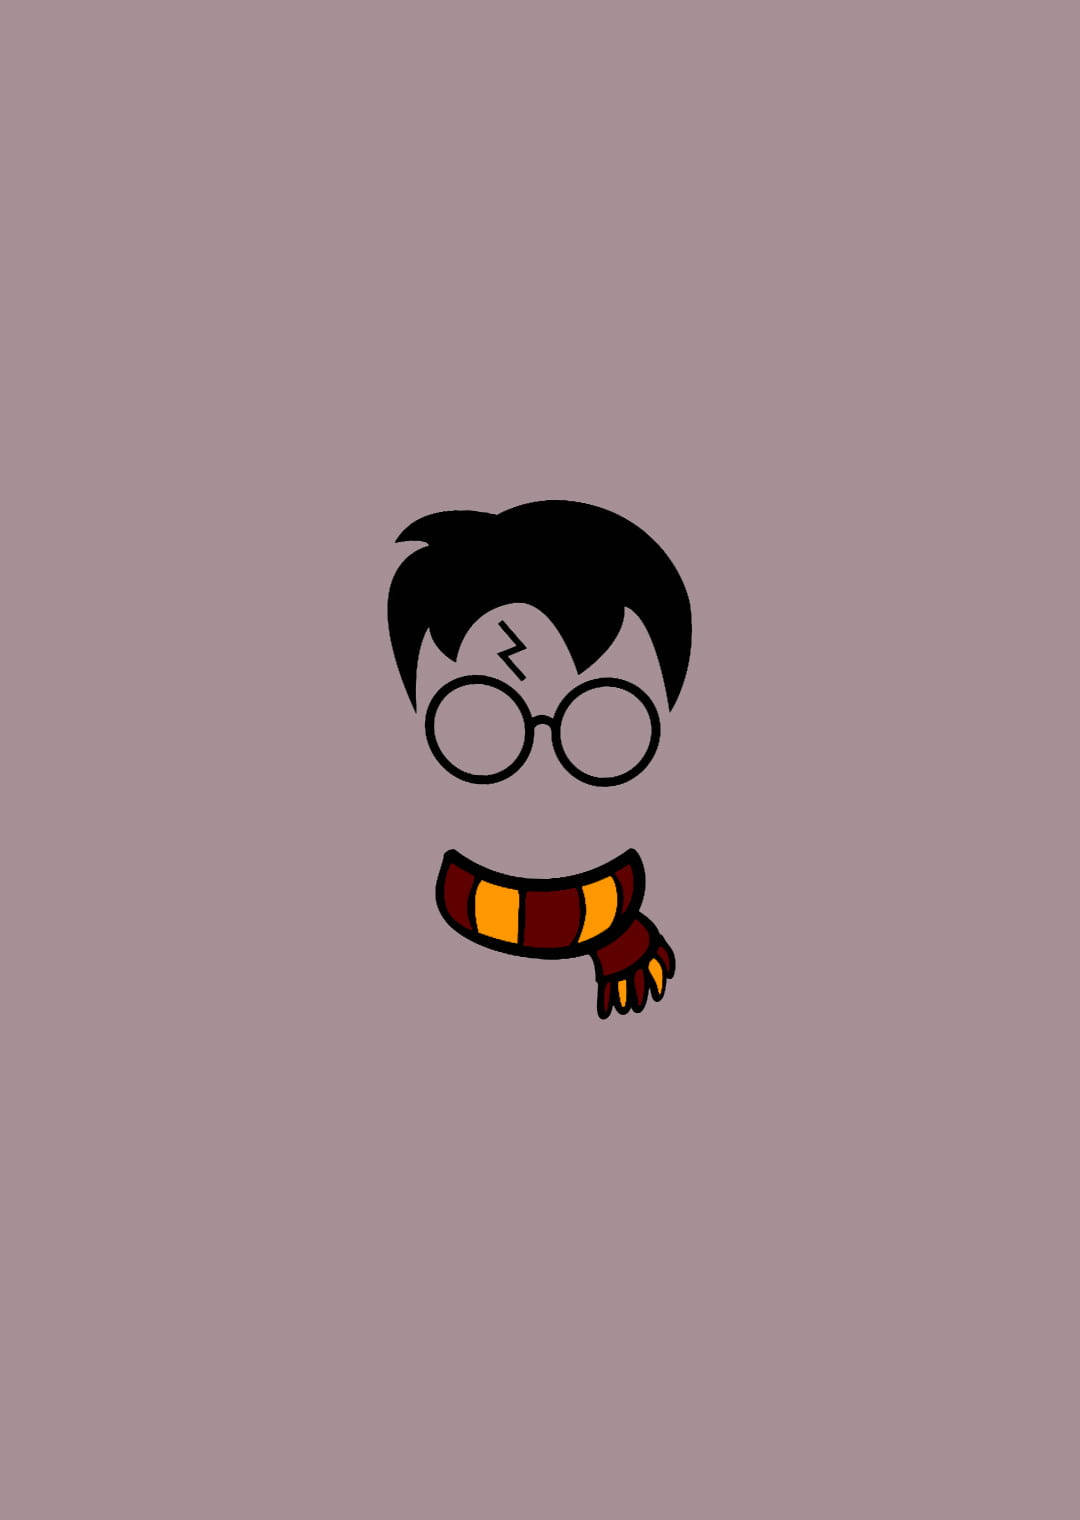 Cute Harry Potter Art Scarf Background